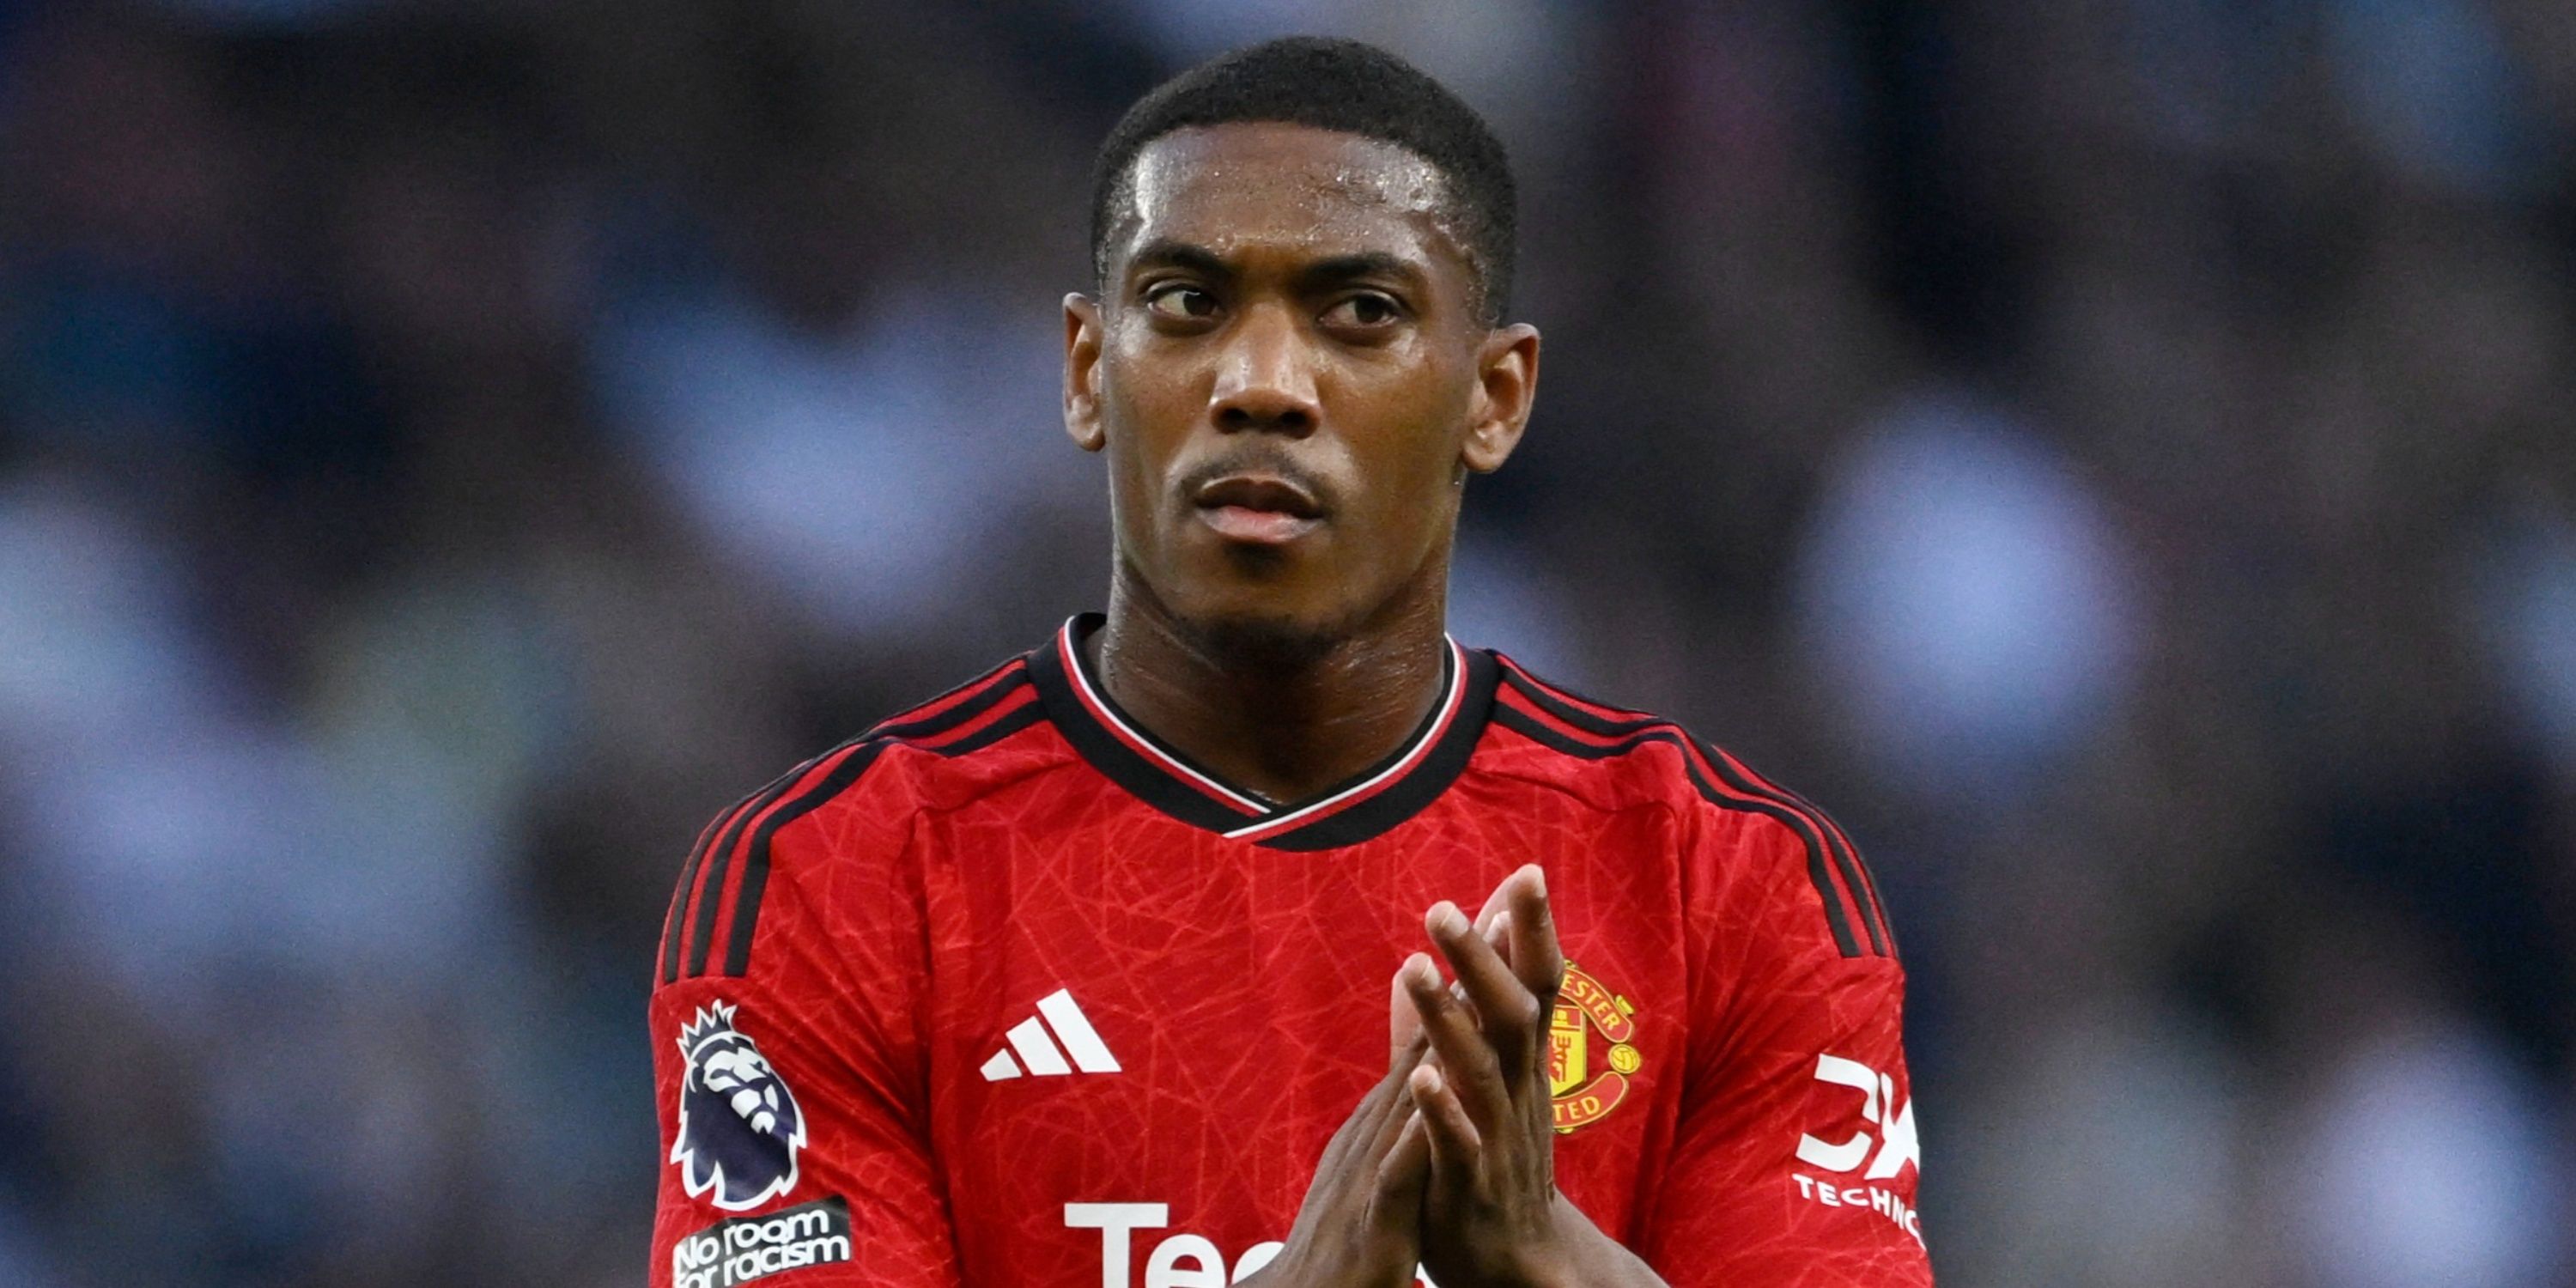 man utd had a mare on £190k-p/w liability who is worth less than martial